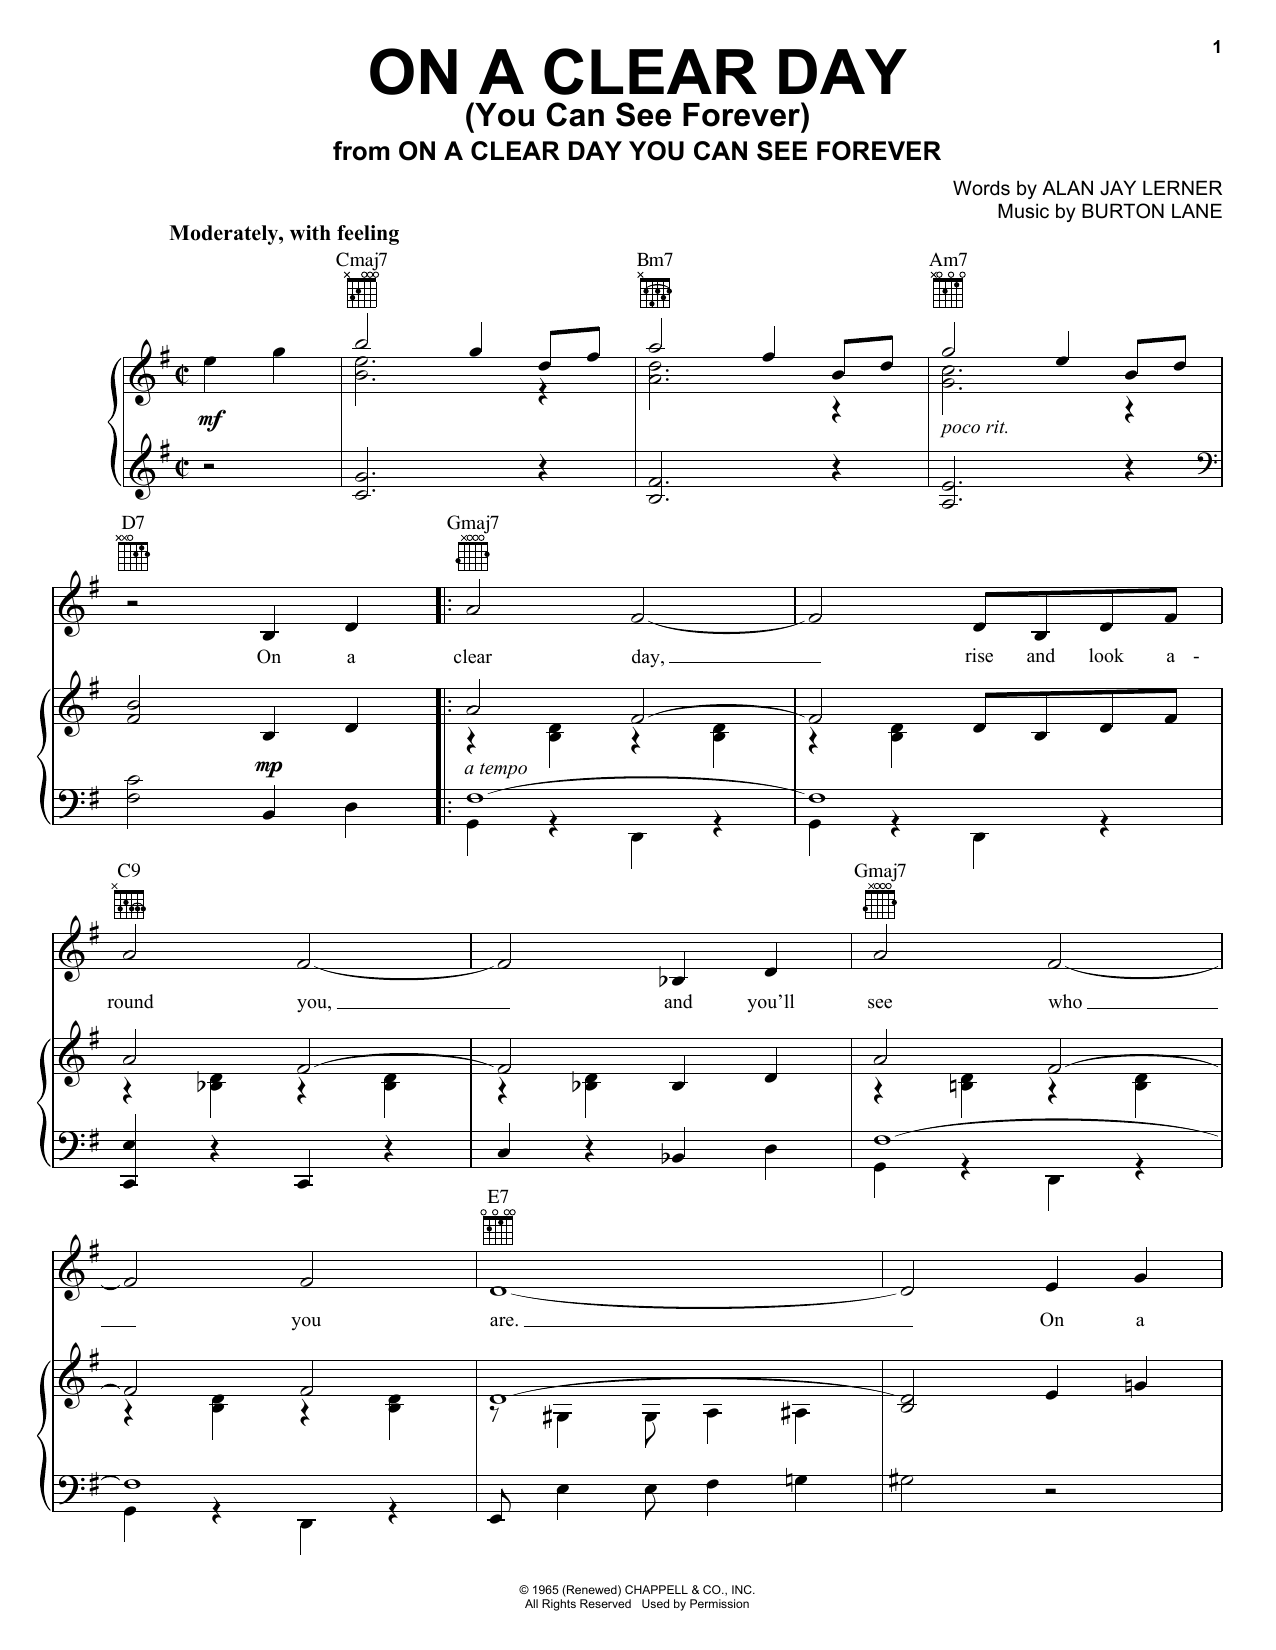 Download Frank Sinatra On A Clear Day (You Can See Forever) Sheet Music